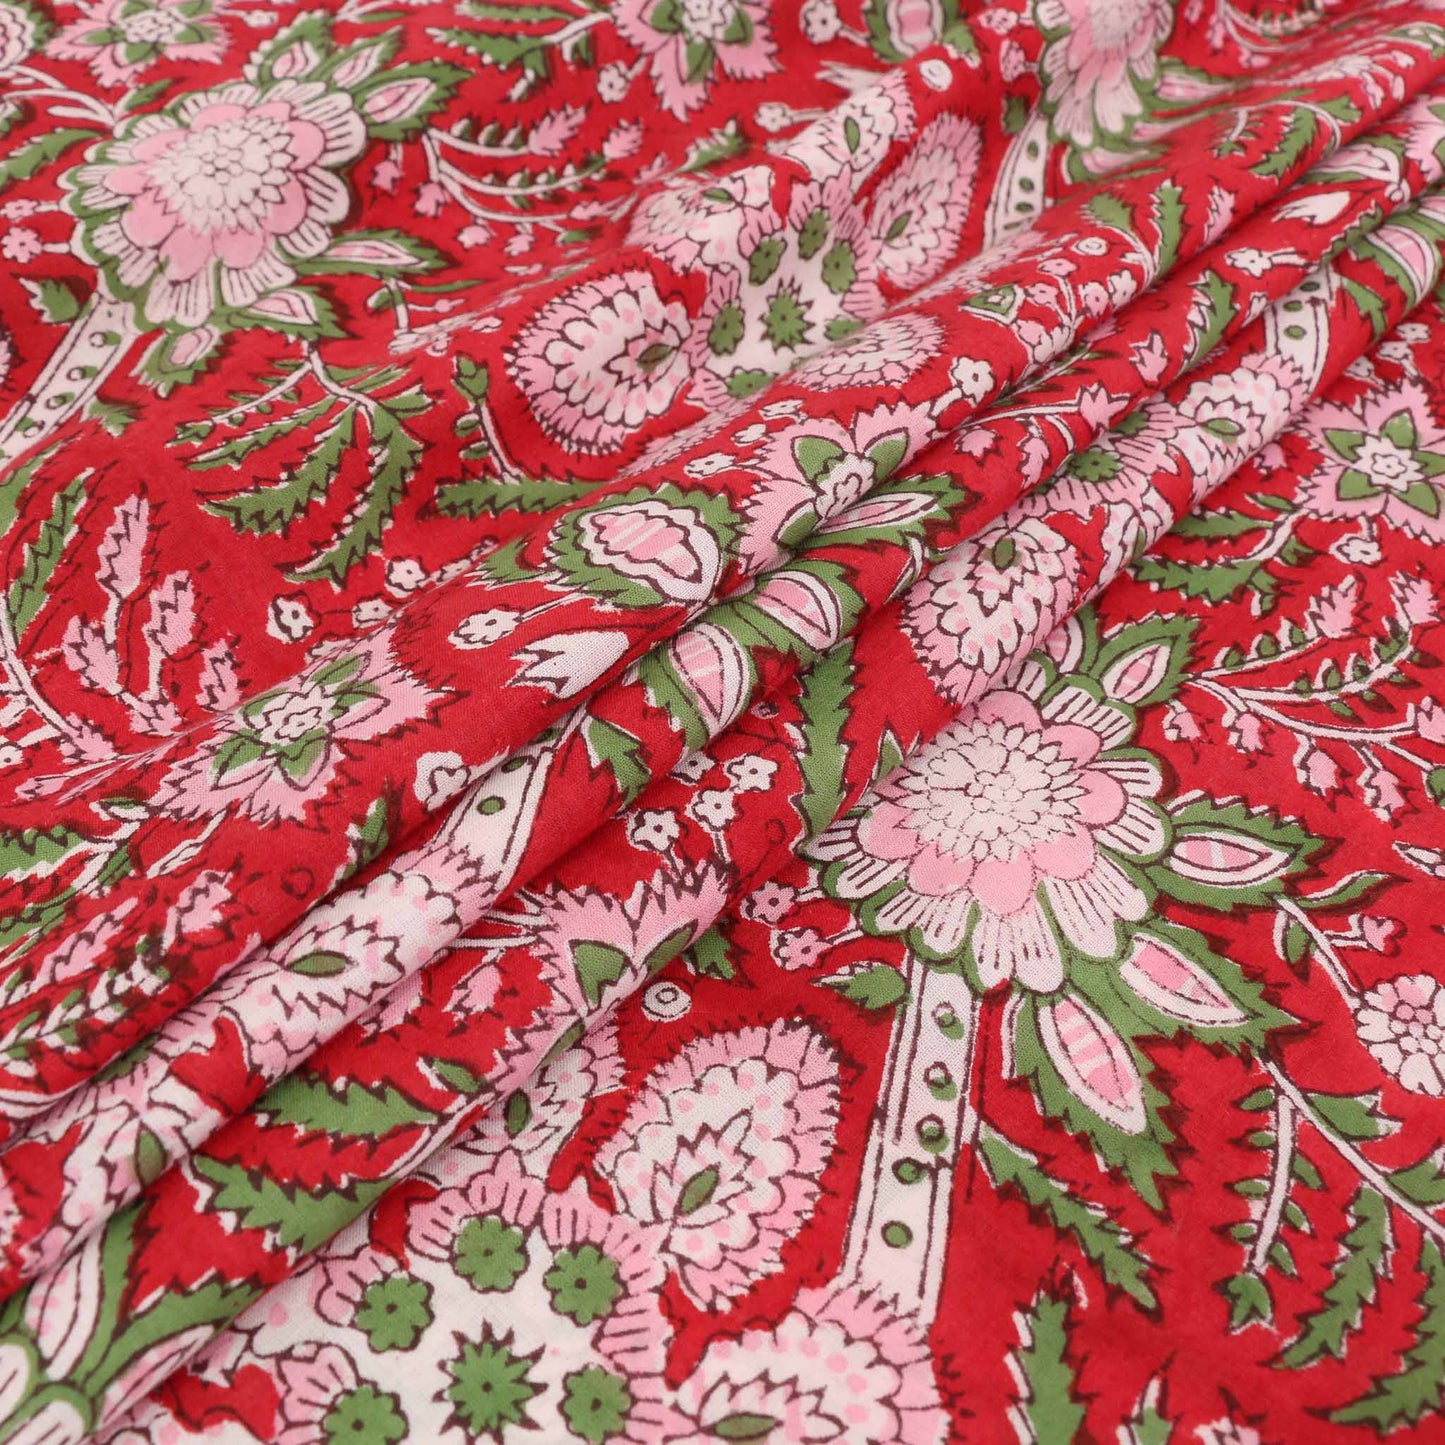 Cotton Voile - Hand block print - Red